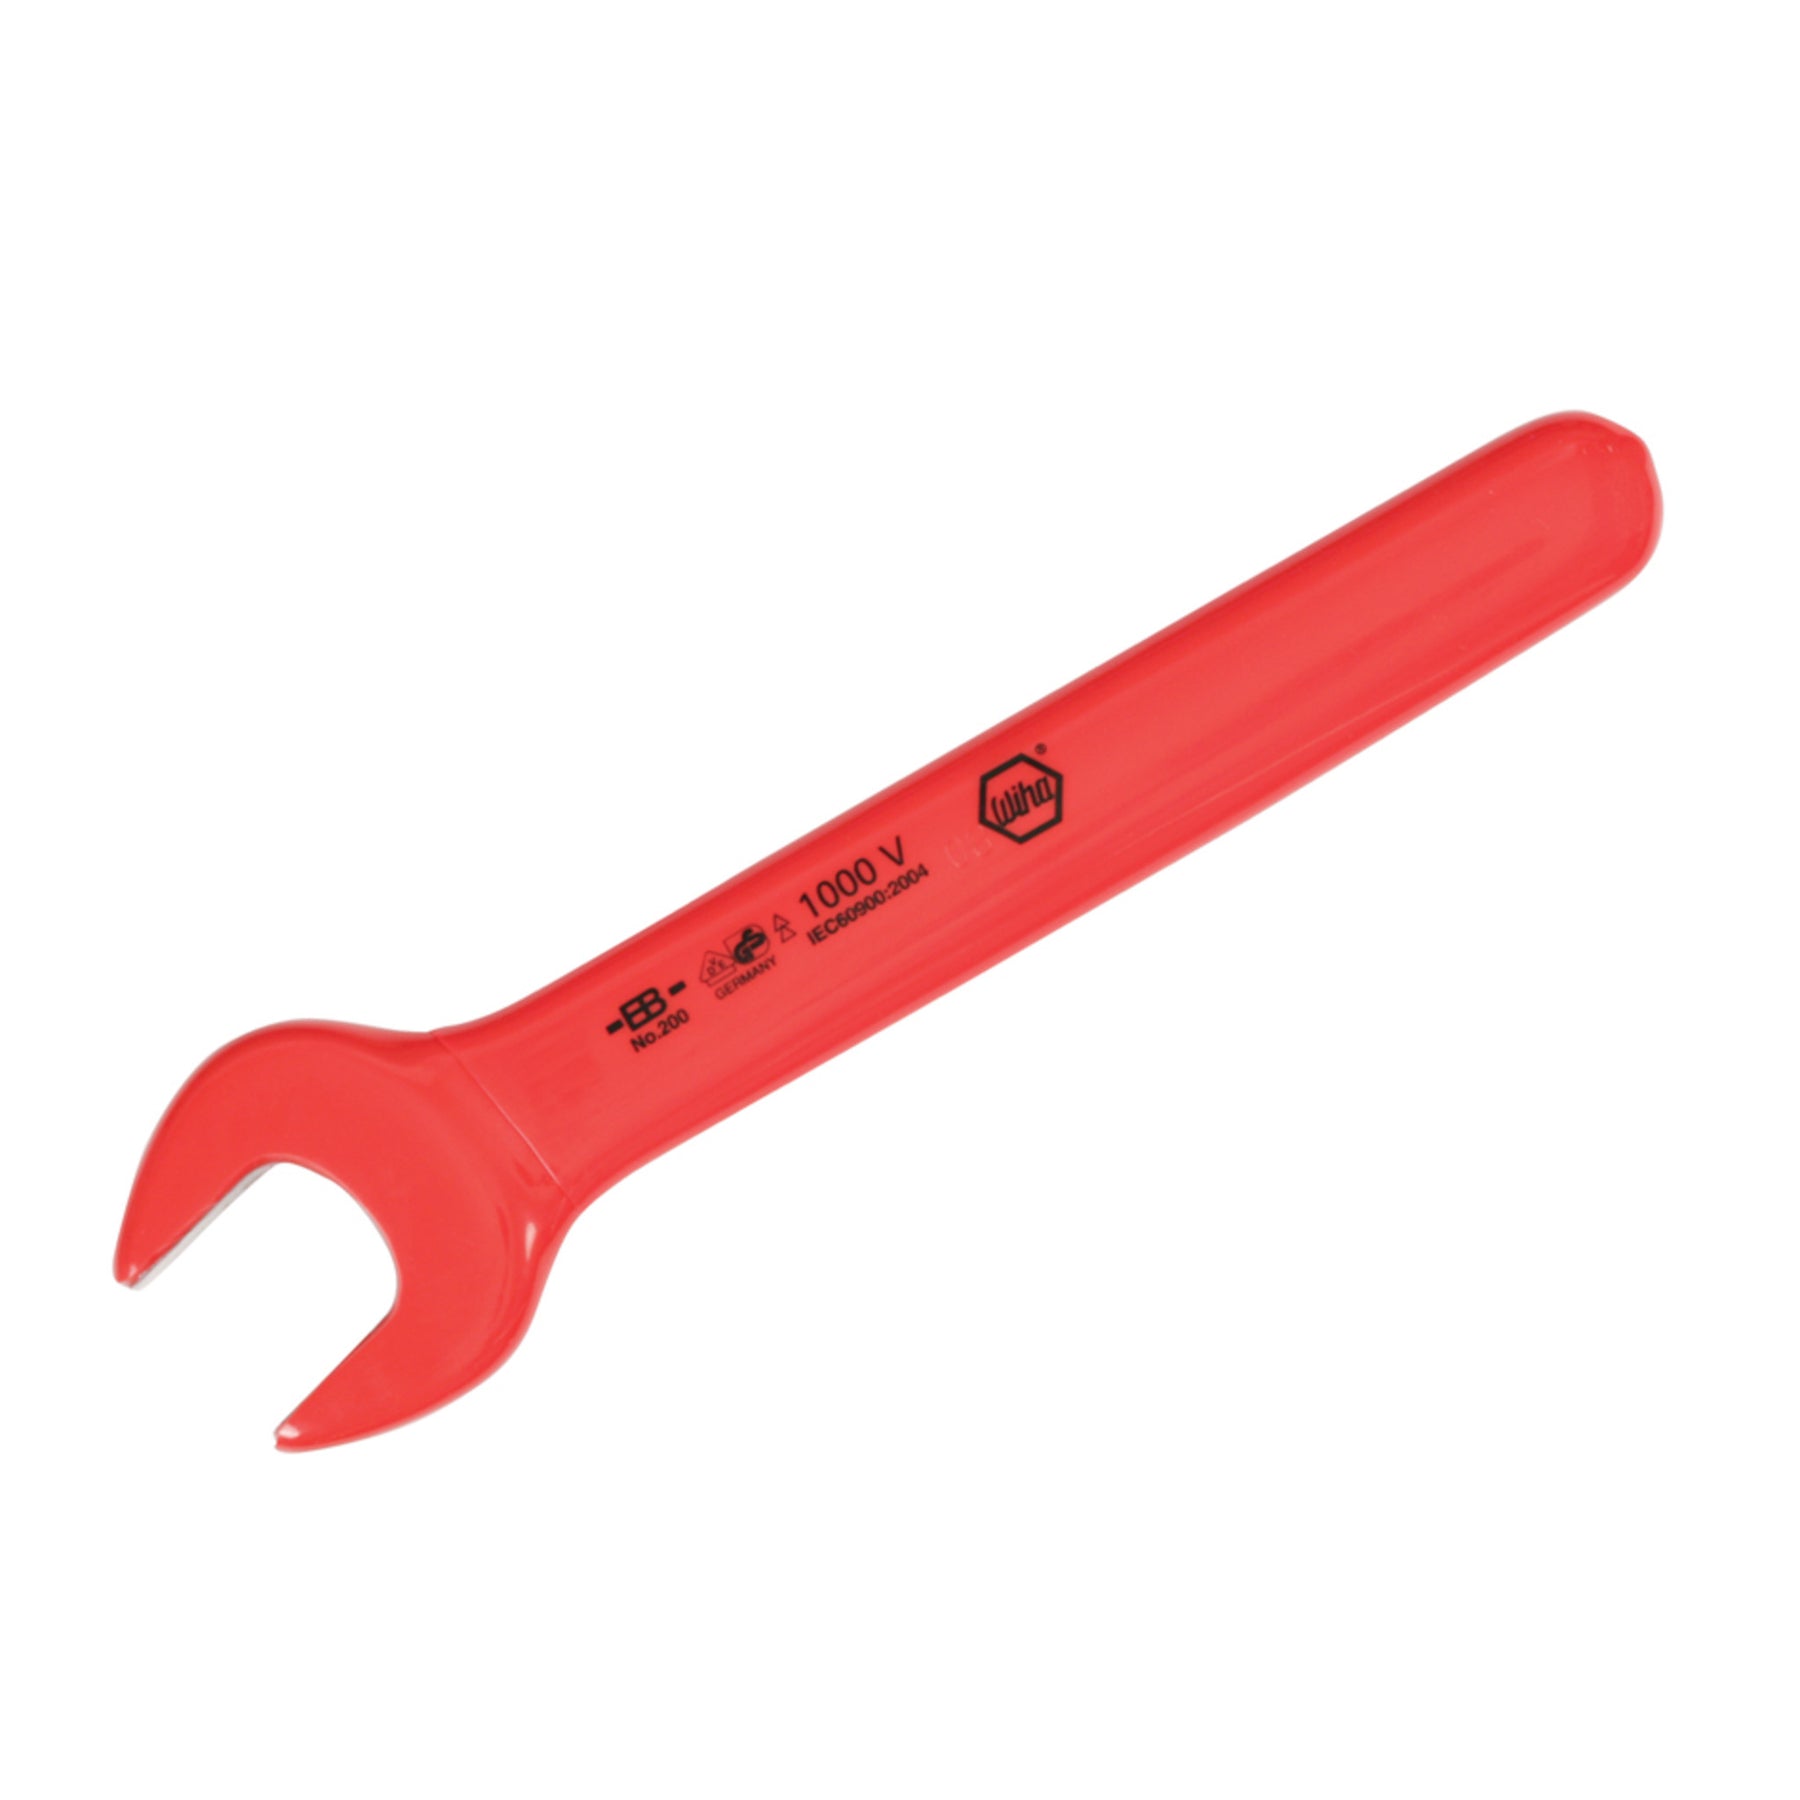 Wiha 20018 Insulated Open End Wrench 18.0mm